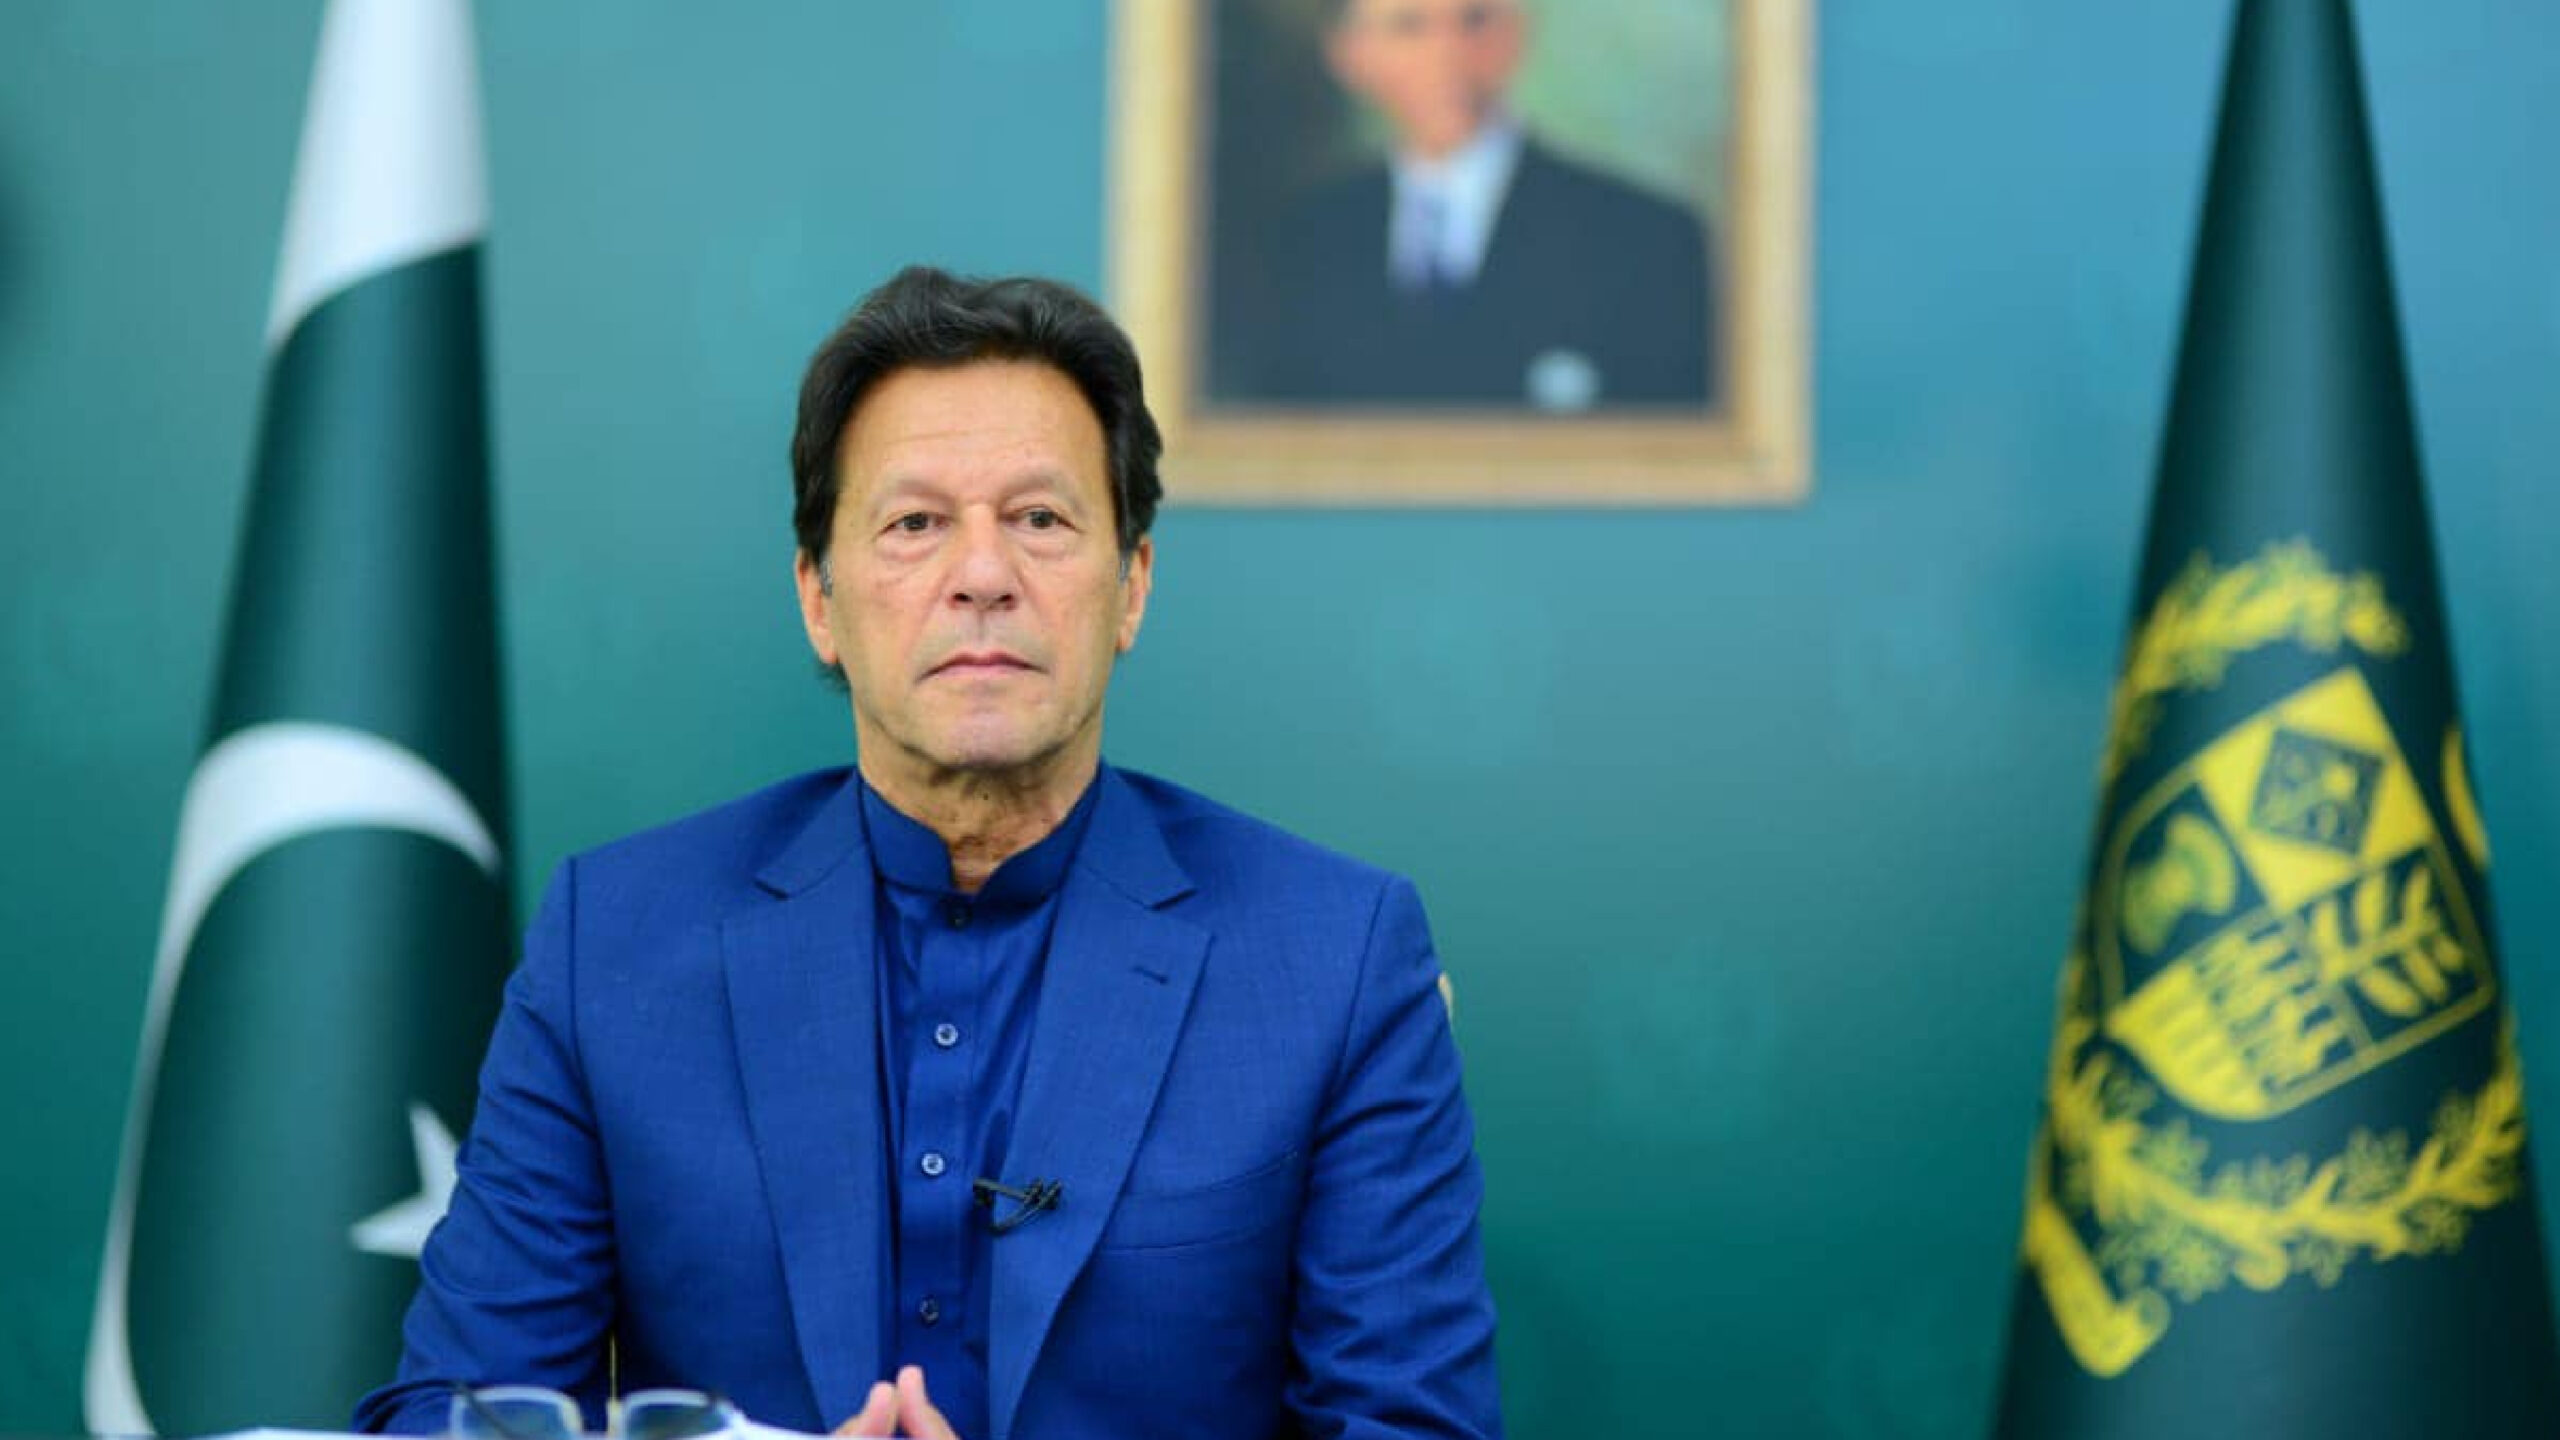 Proud of the first half of my era: PM Khan